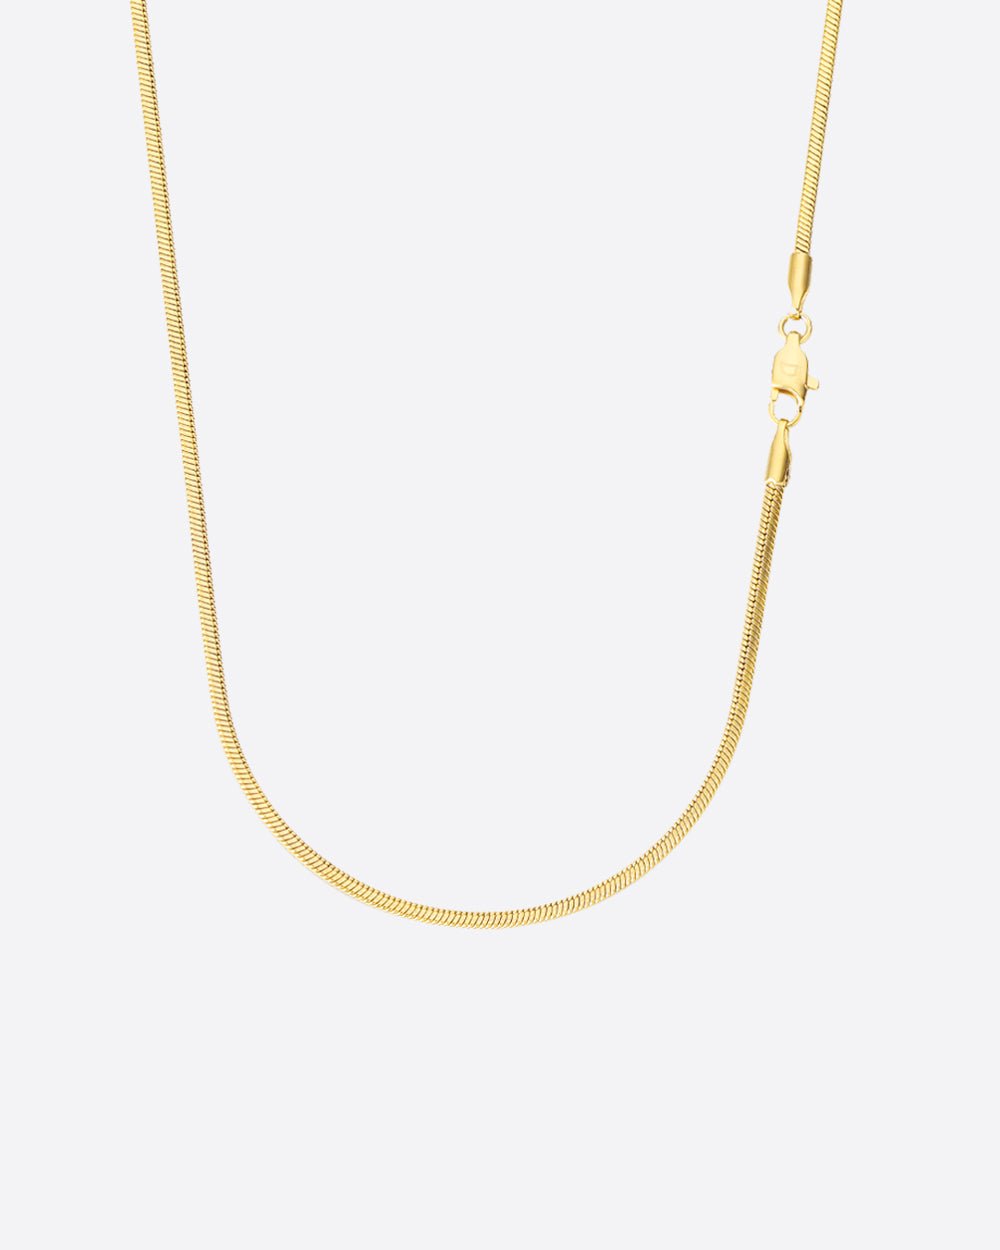 CLEAN SNAKE CHAIN. - 2MM 18K GOLD